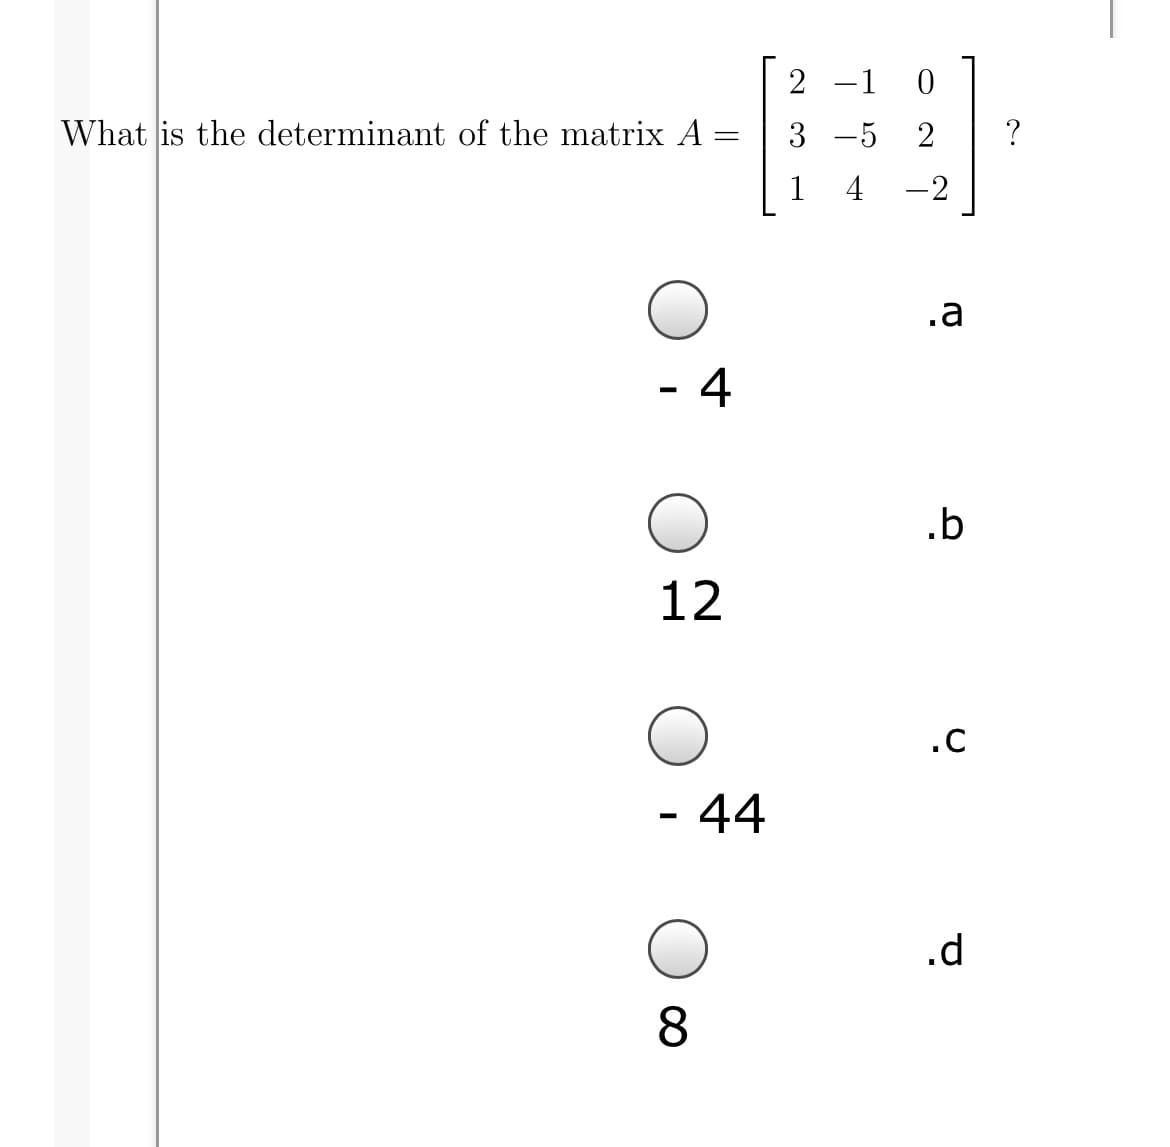 2 -1 0
What is the determinant of the matrix A:
3 -5 2
?
1
4
-2
.a
- 4
.b
12
- 44
.d
8.
